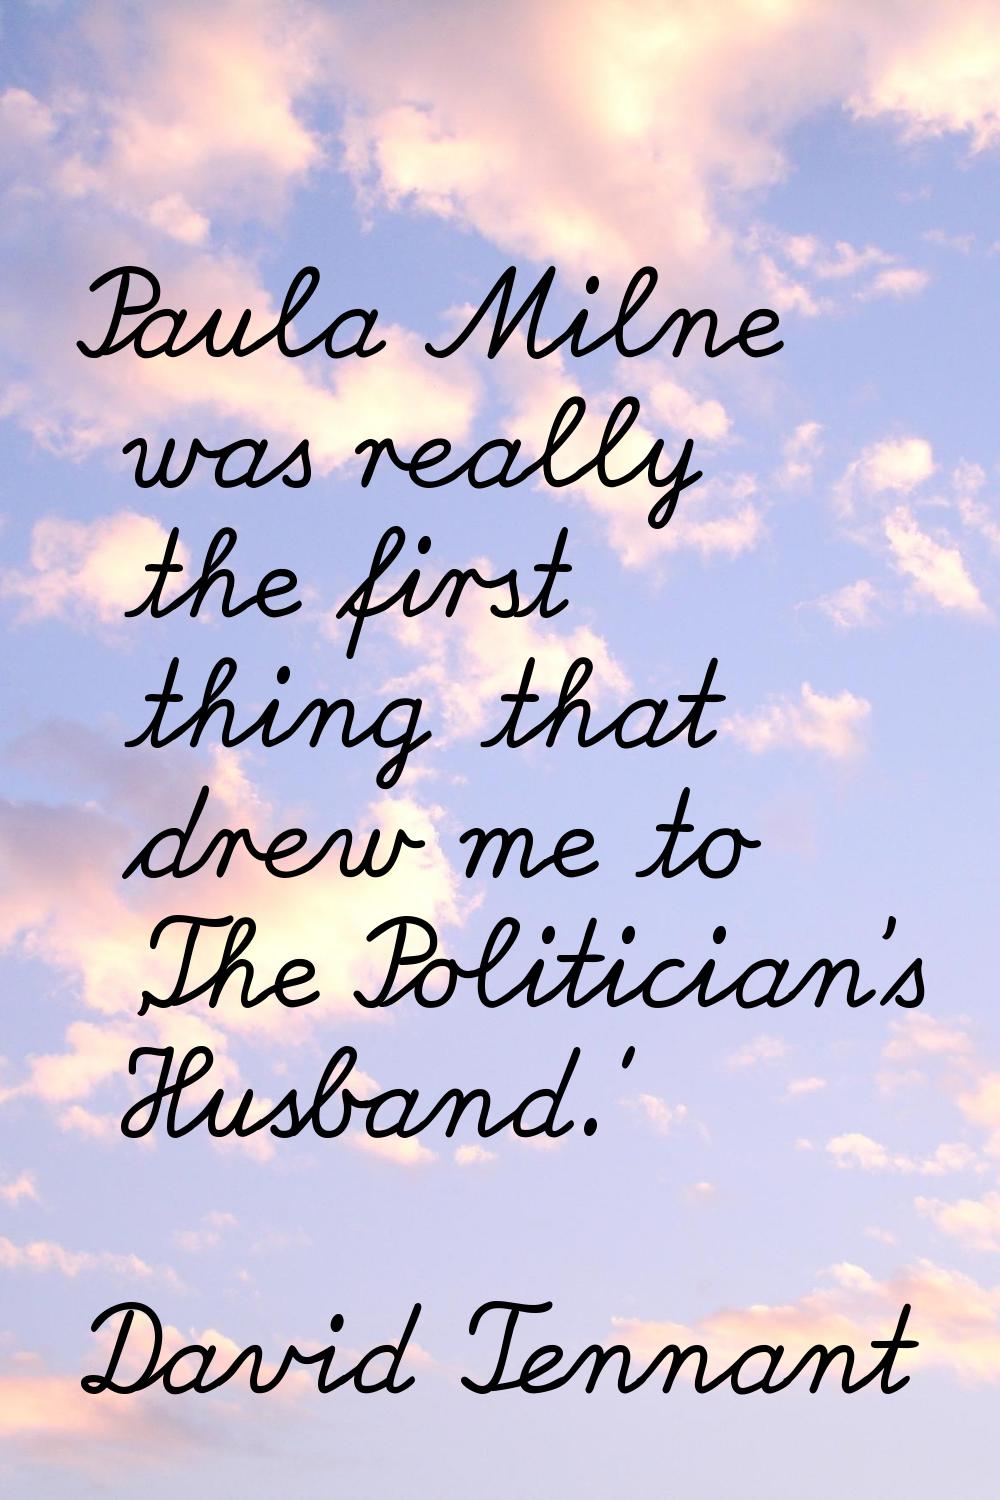 Paula Milne was really the first thing that drew me to 'The Politician's Husband.'